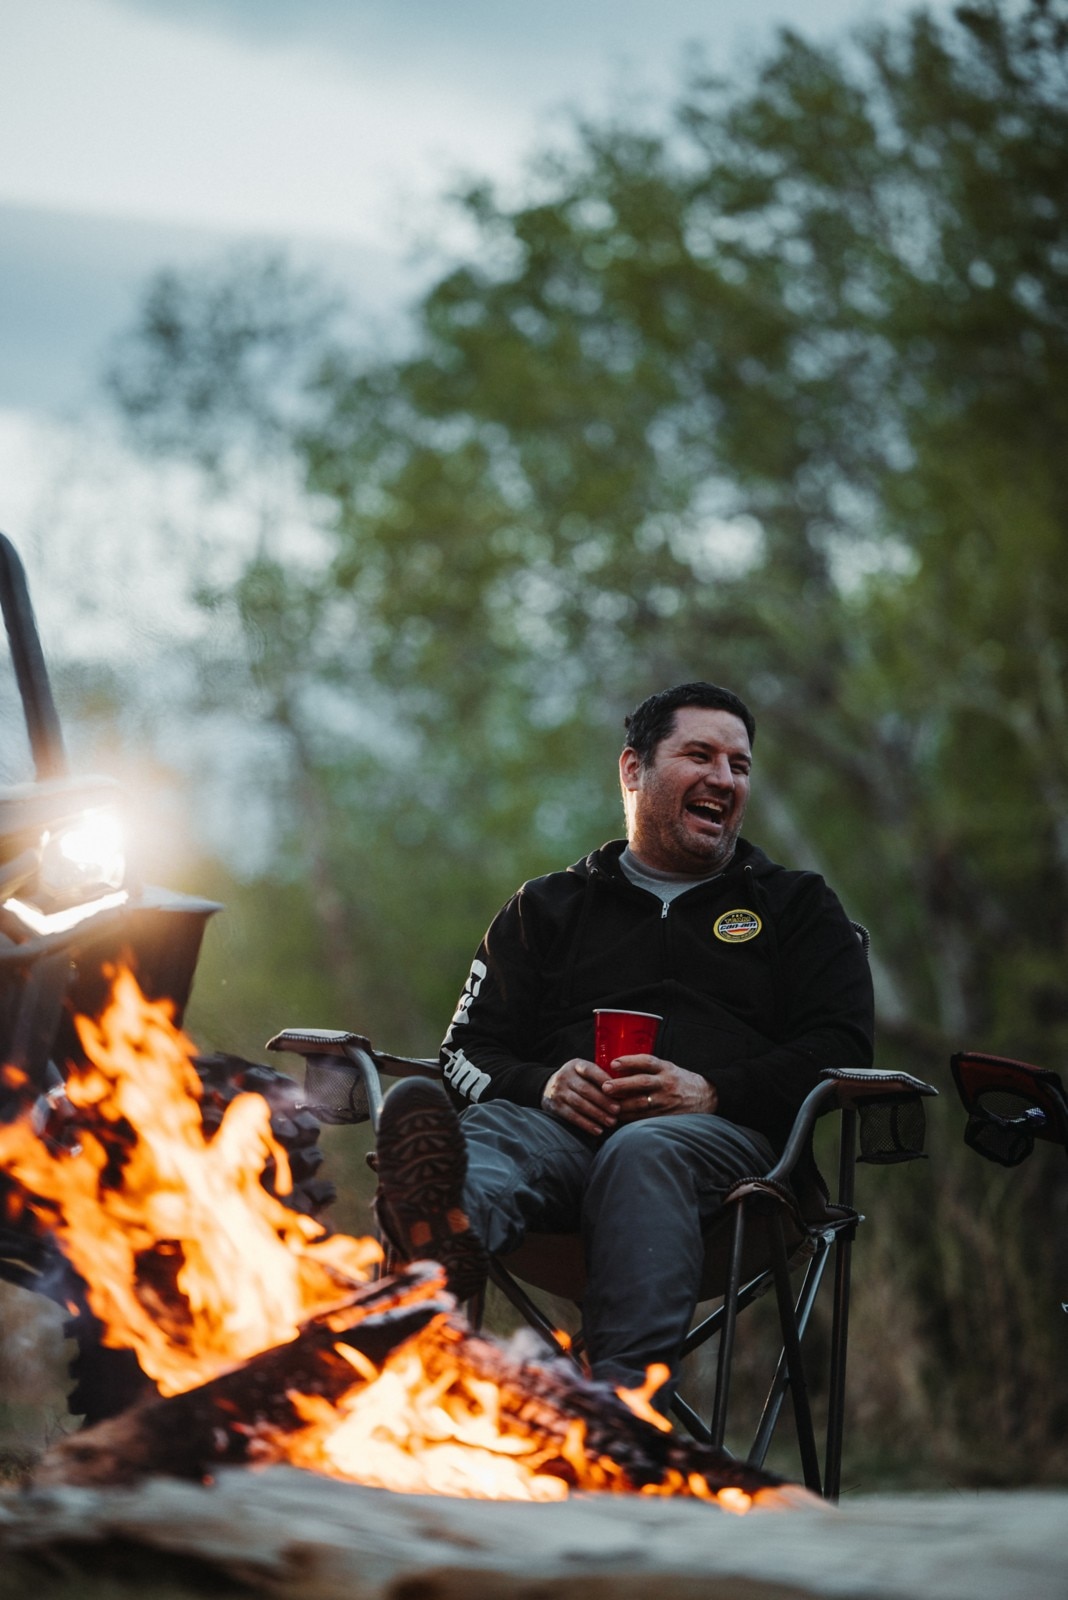 Guy grilling marshmallow by bonfire